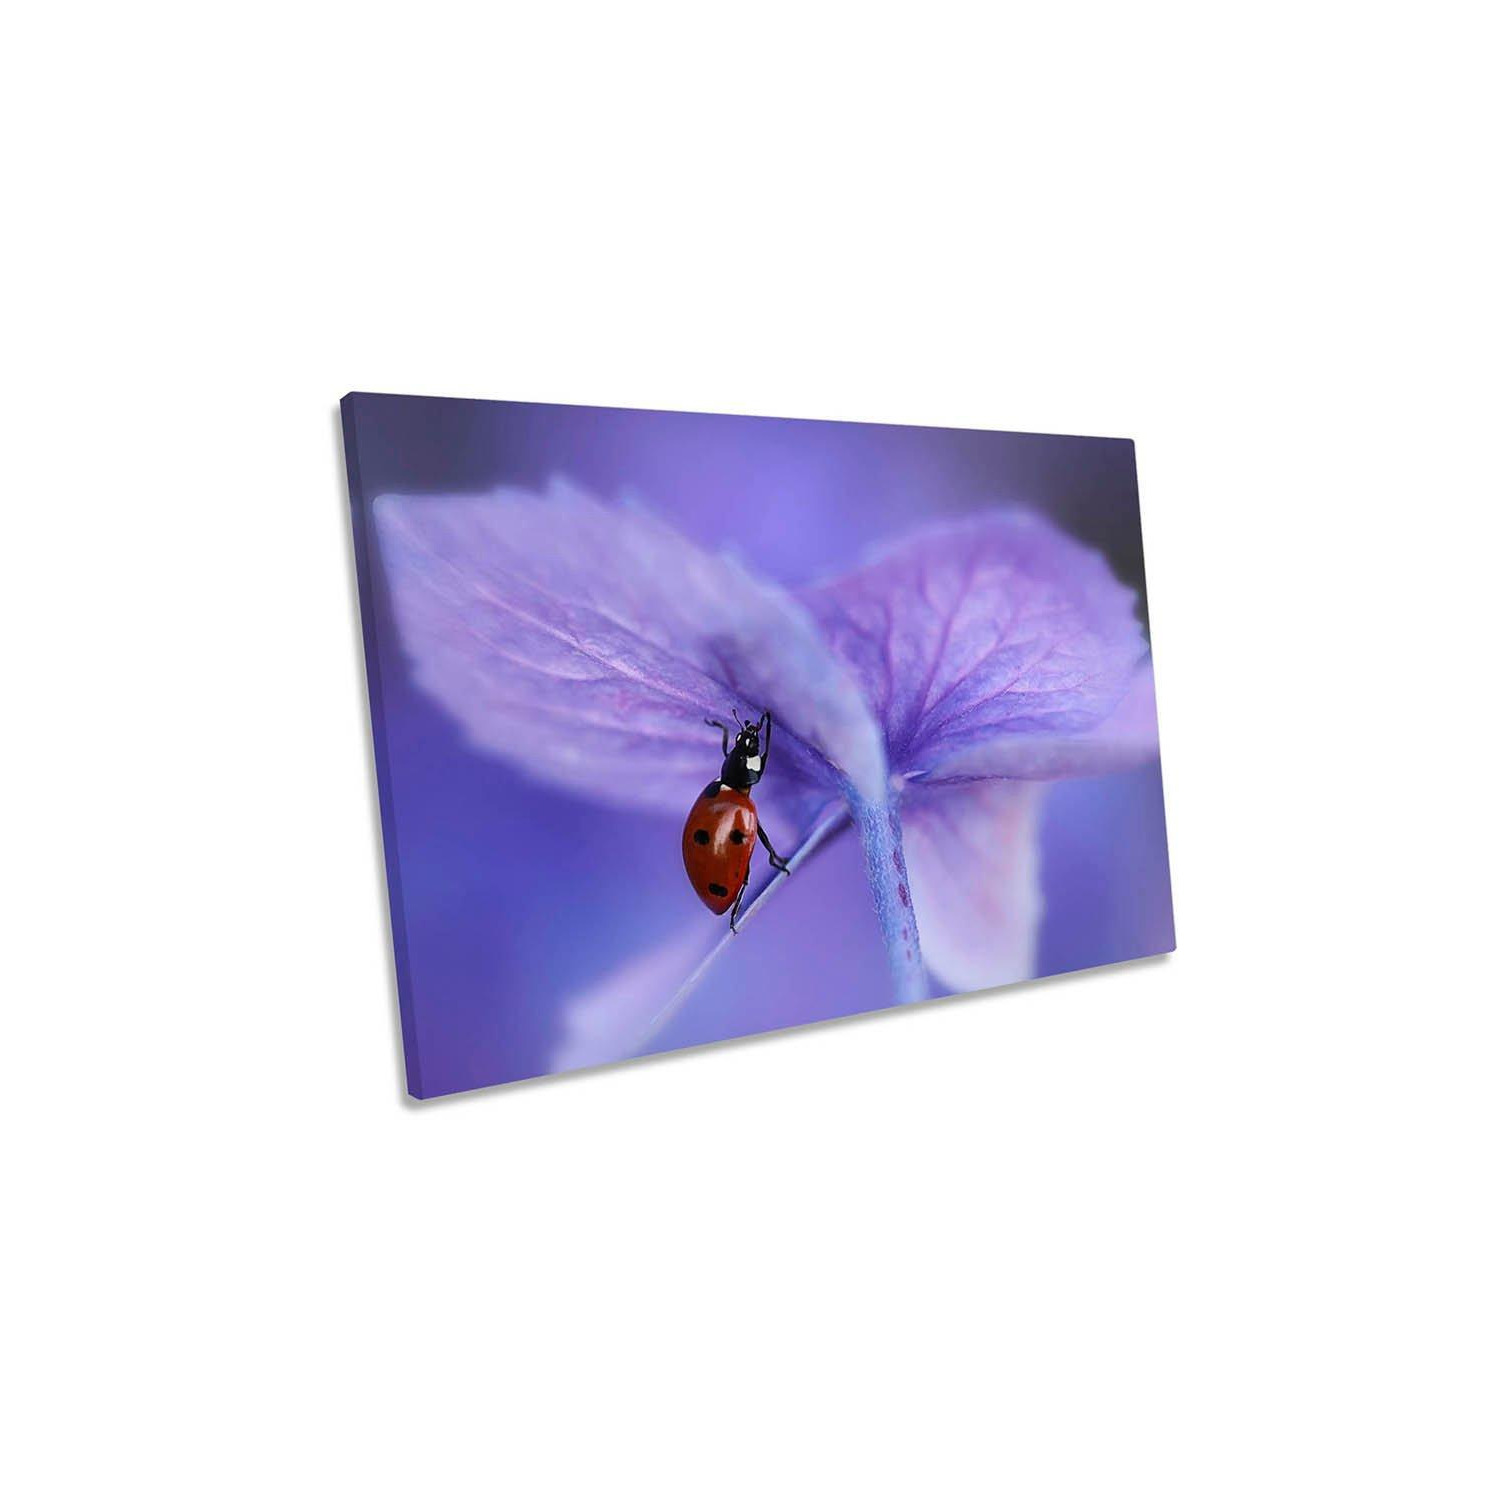 Ladybird on Purple Flower Canvas Wall Art Picture Print - image 1